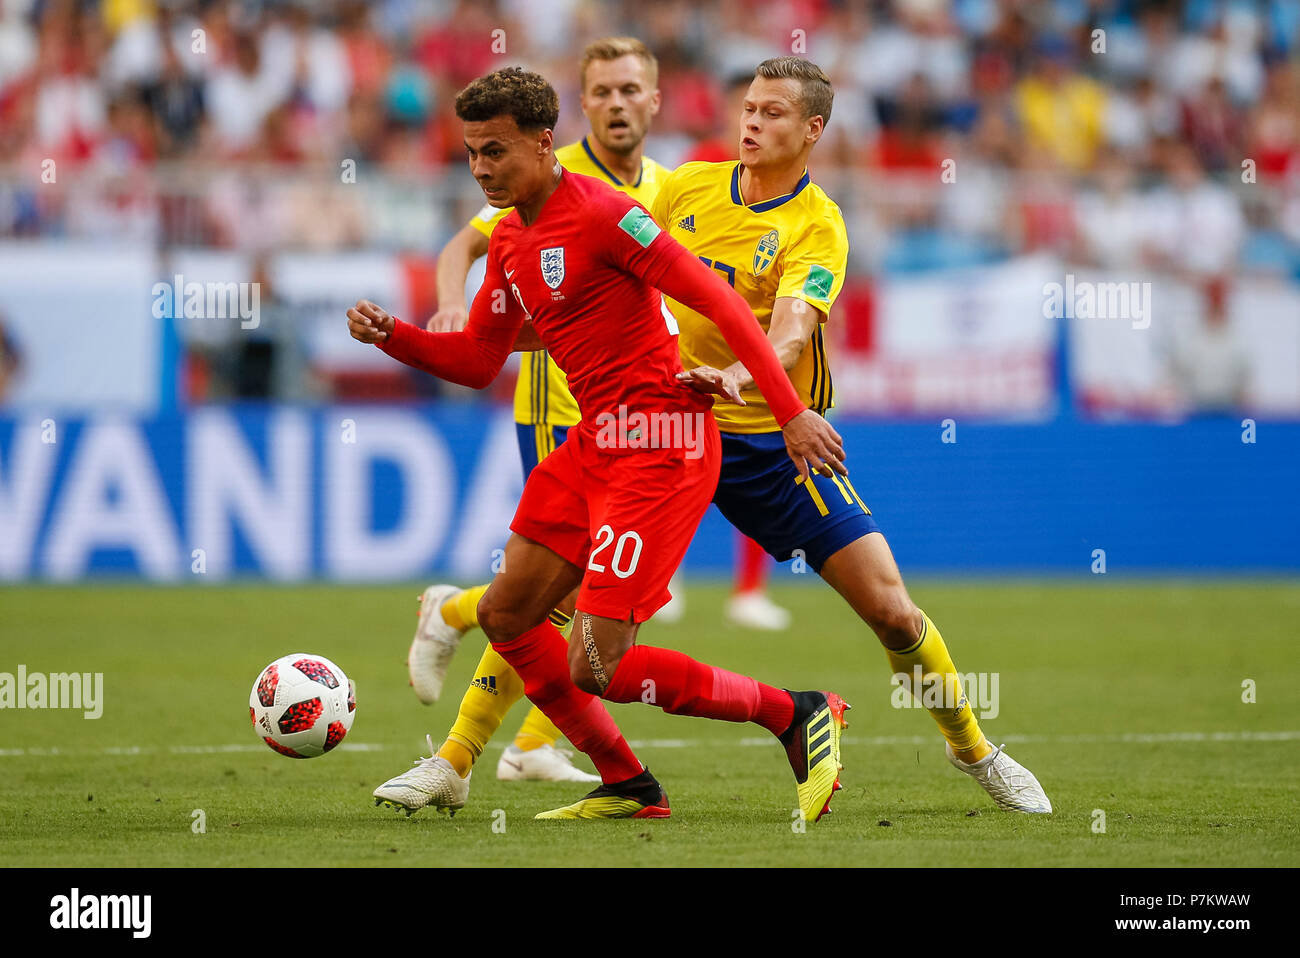 Samara, Russia. 7th July 2018. Dele Alli of England and Viktor Claesson of Sweden during the 2018 FIFA World Cup Quarter Final match between Sweden and England at Samara Arena on July 7th 2018 in Samara, Russia. (Photo by Daniel Chesterton/phcimages.com) Credit: PHC Images/Alamy Live News Stock Photo